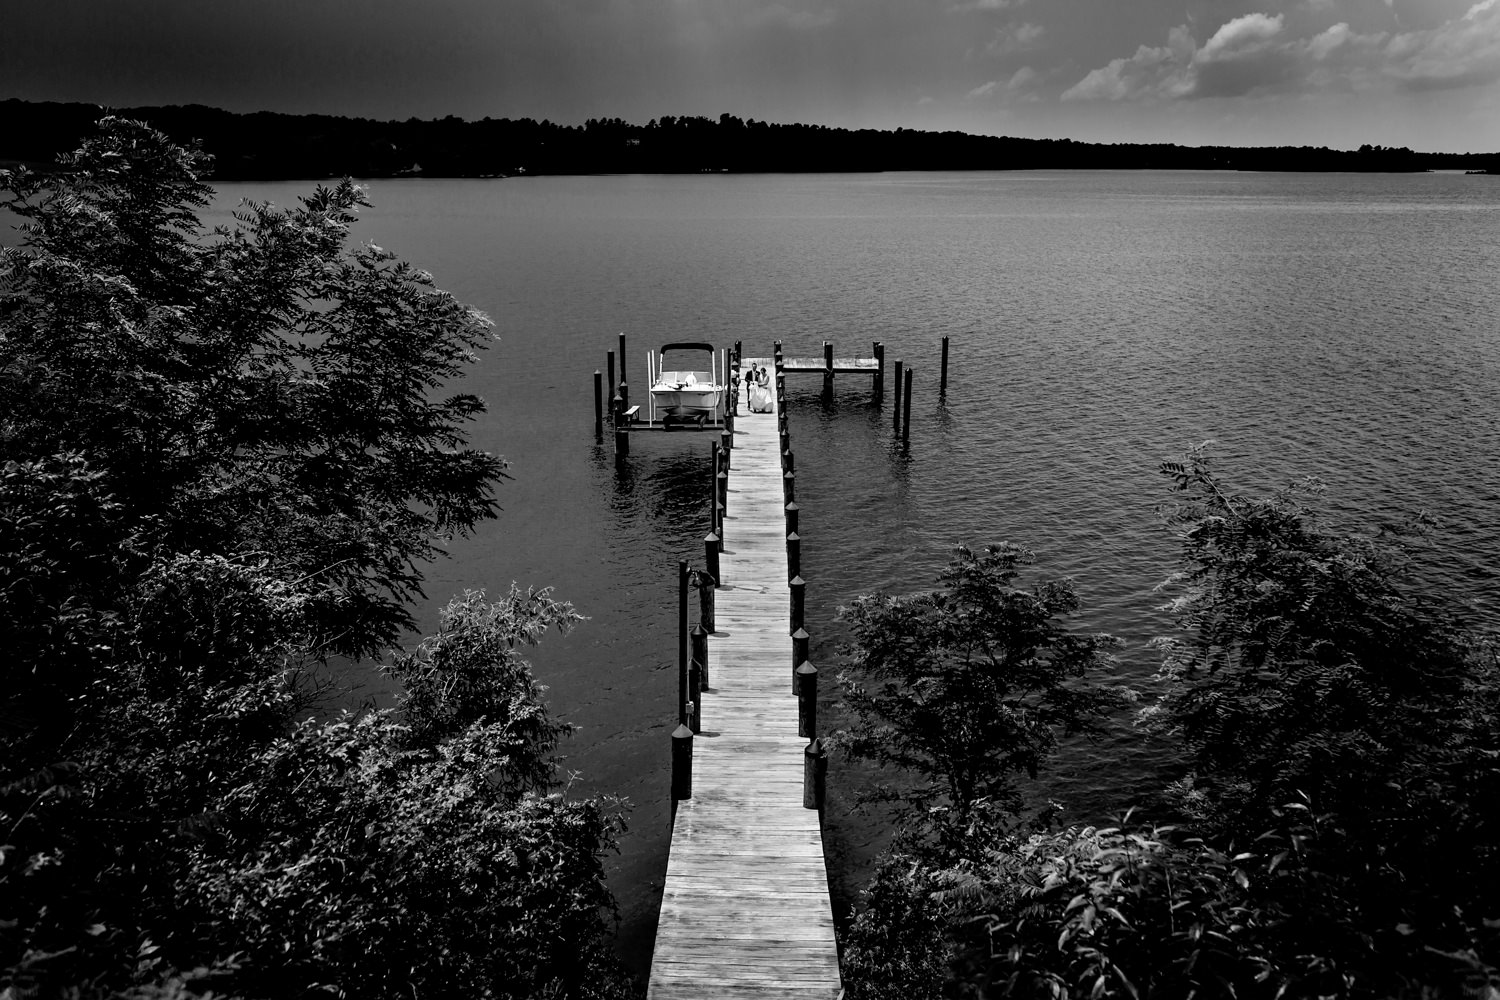 Eastern shore wedding, the bride and groom walked far out on a dock and started coming back, this black and white photo is a landscape of the water and the long dock stretching far out into the distance, the couple is small in the frame, Procopio Photography, best top Washington DC photographer, best top Maryland photographer, best top Virginia photographer, best top DMV photographer, best top wedding photographer, best top commercial photographer, best top portrait photographer, best top boudoir photographer, modern fine art portraits, dramatic, unique, different, bold, editorial, photojournalism, award winning photographer, published photographer, memorable images, be different, stand out